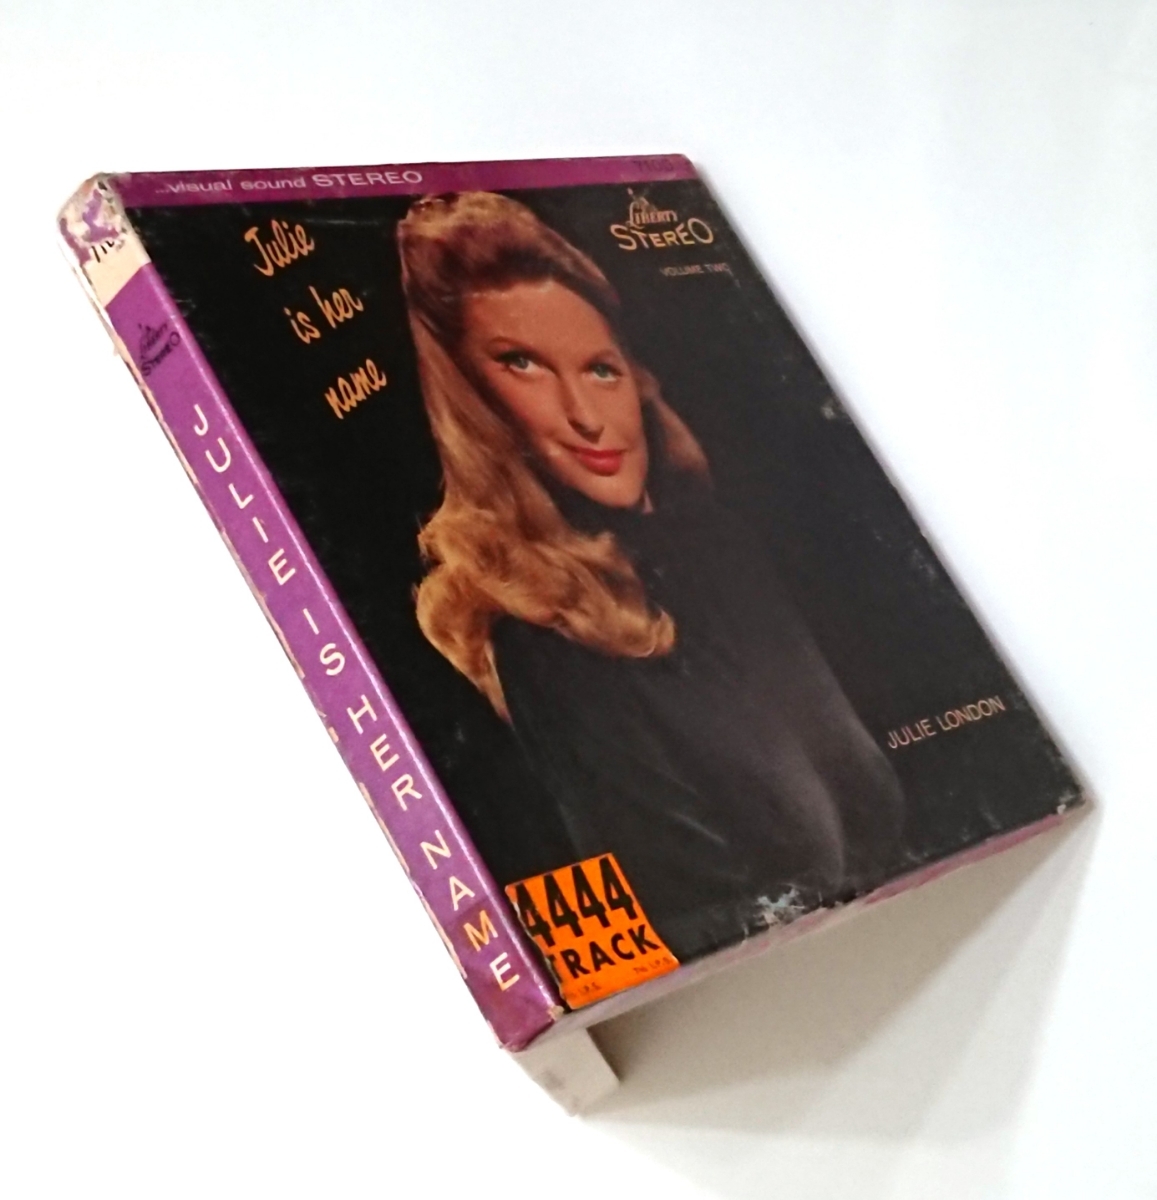 JULIE LONDON/JULIE IS HER NAME VOL.2 US 7 1/2 * used open reel reproduction has confirmed Jeury - London 